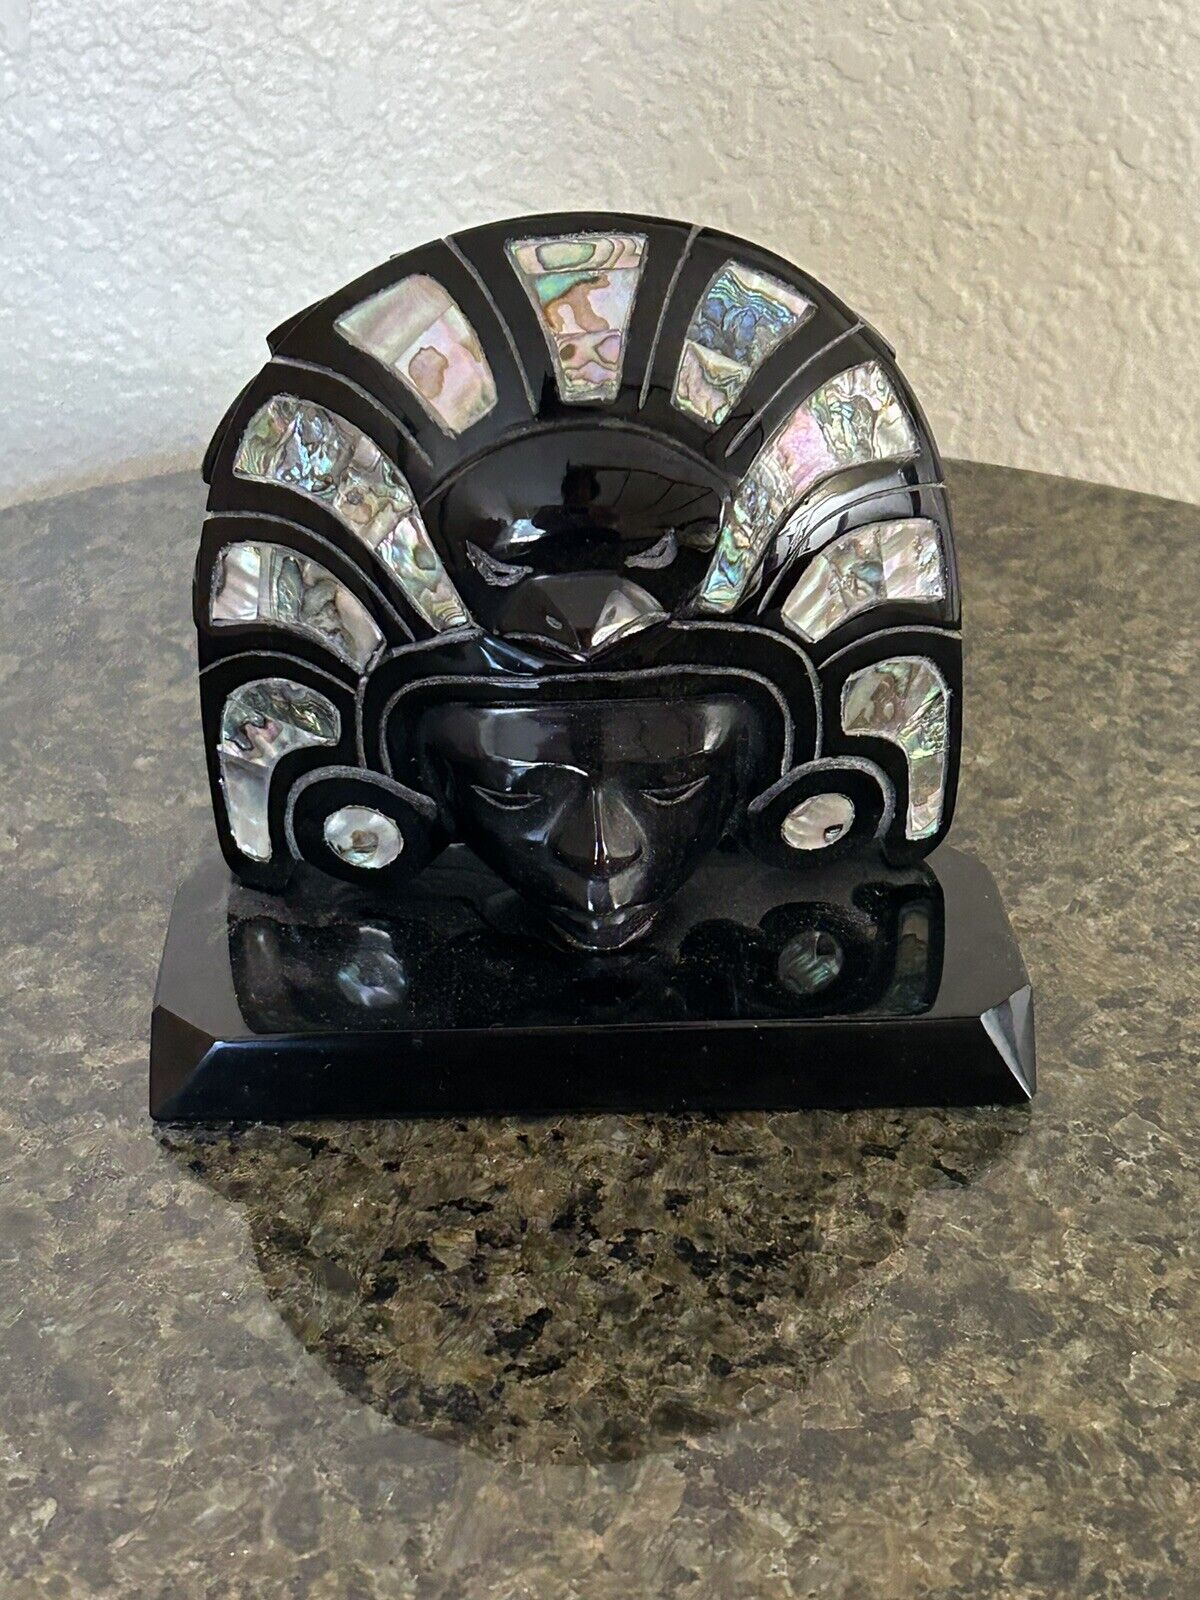 Mexican Mayan Obsidian Bookends Sculpture Abalone  Aztec Teotihuacan Sun God